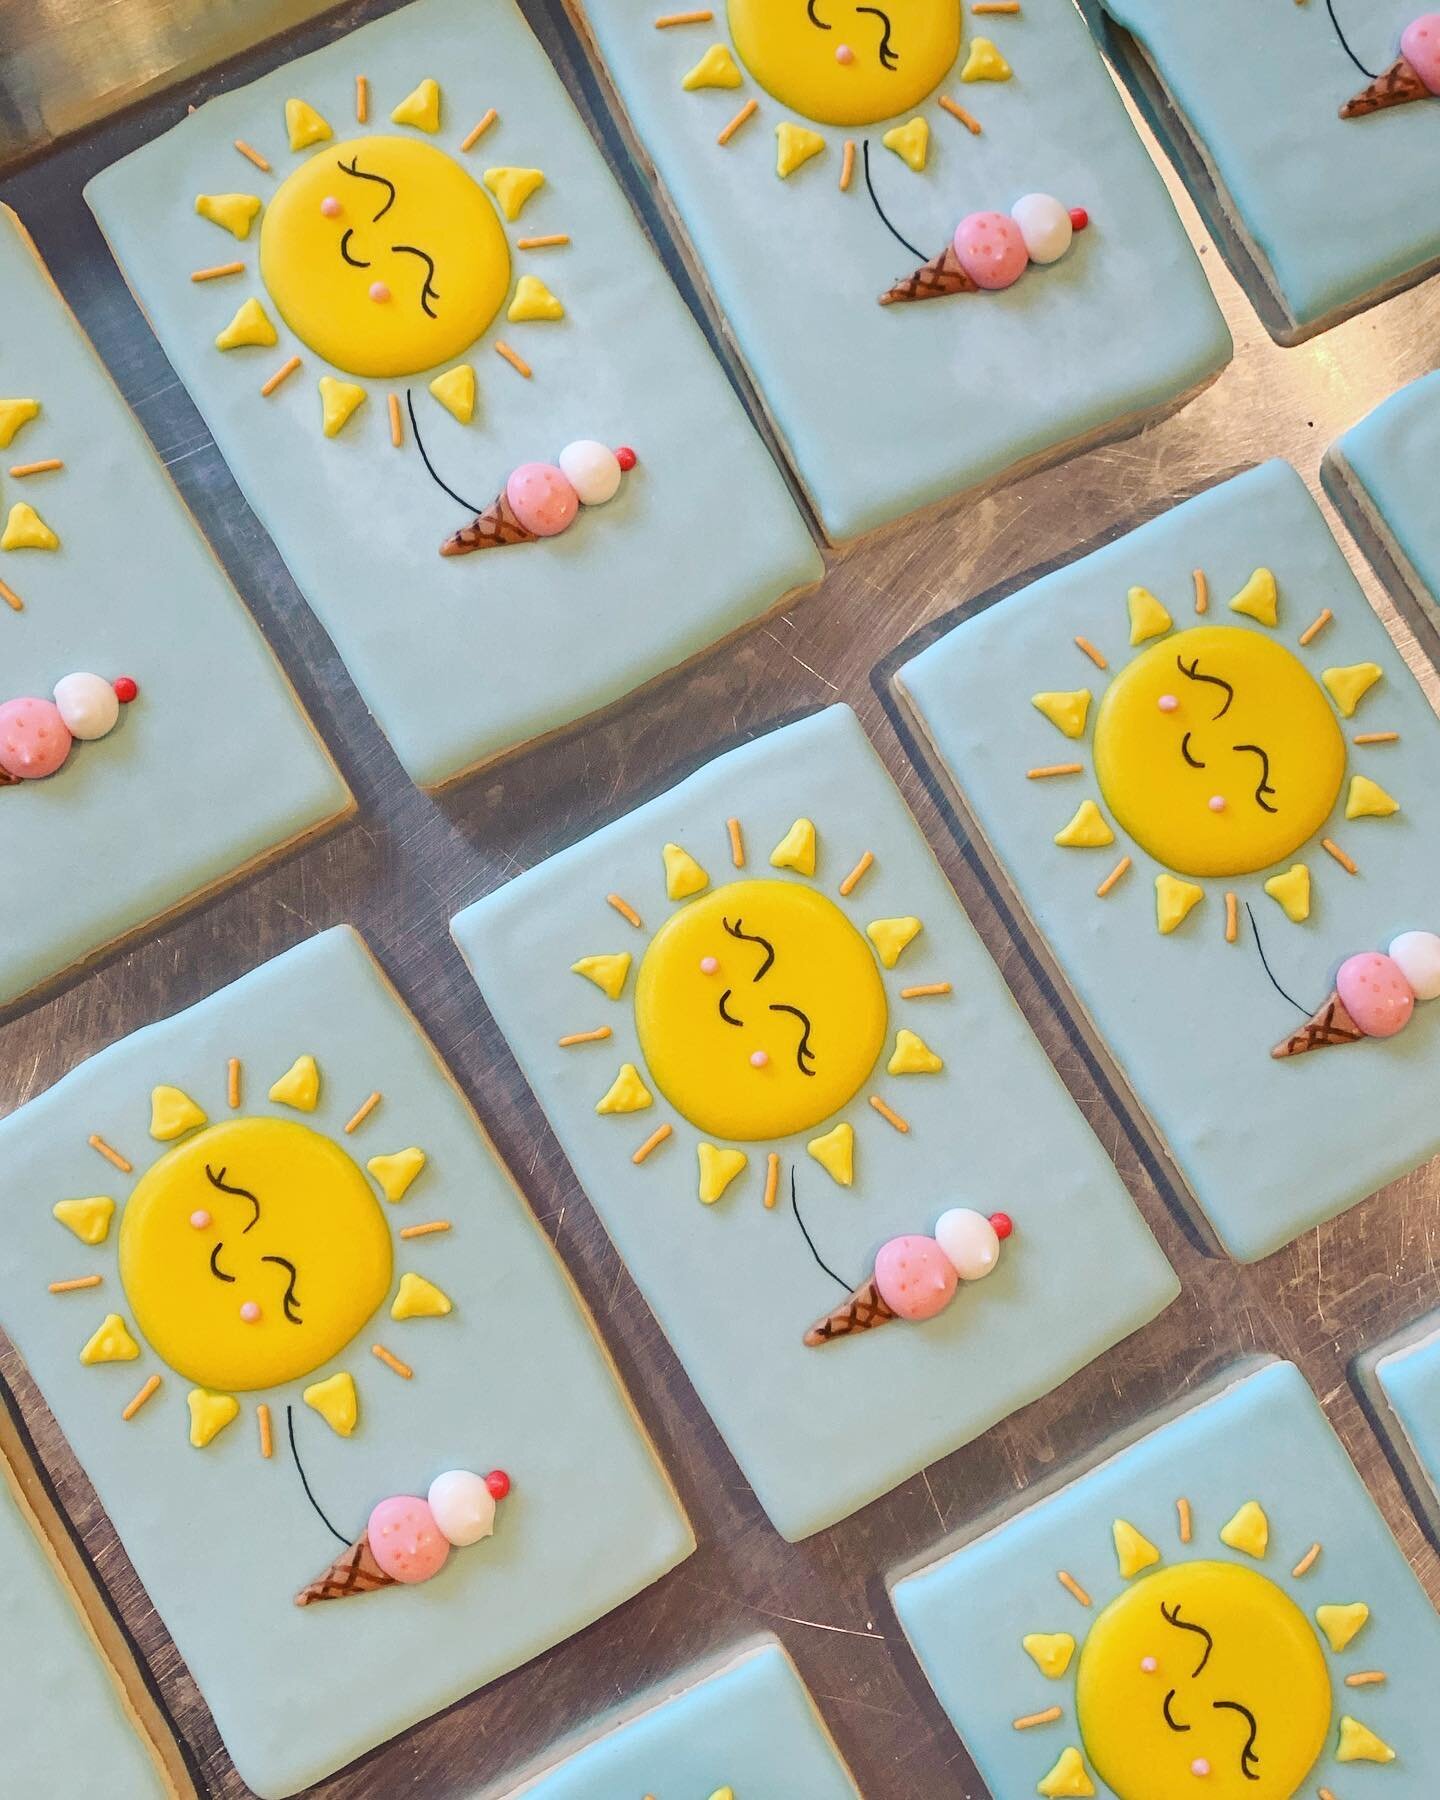 It&rsquo;s been so hot even the sun needs some ice cream to cool off! 🥵 stay cool and hydrated, Denver friends! 
.
.
.
.
.
.
.
.
#suncookies #hotoutside #denvercookies #customcookies #cookiesofinstagram #decoratedcookies #denverbakery #denvereats #c